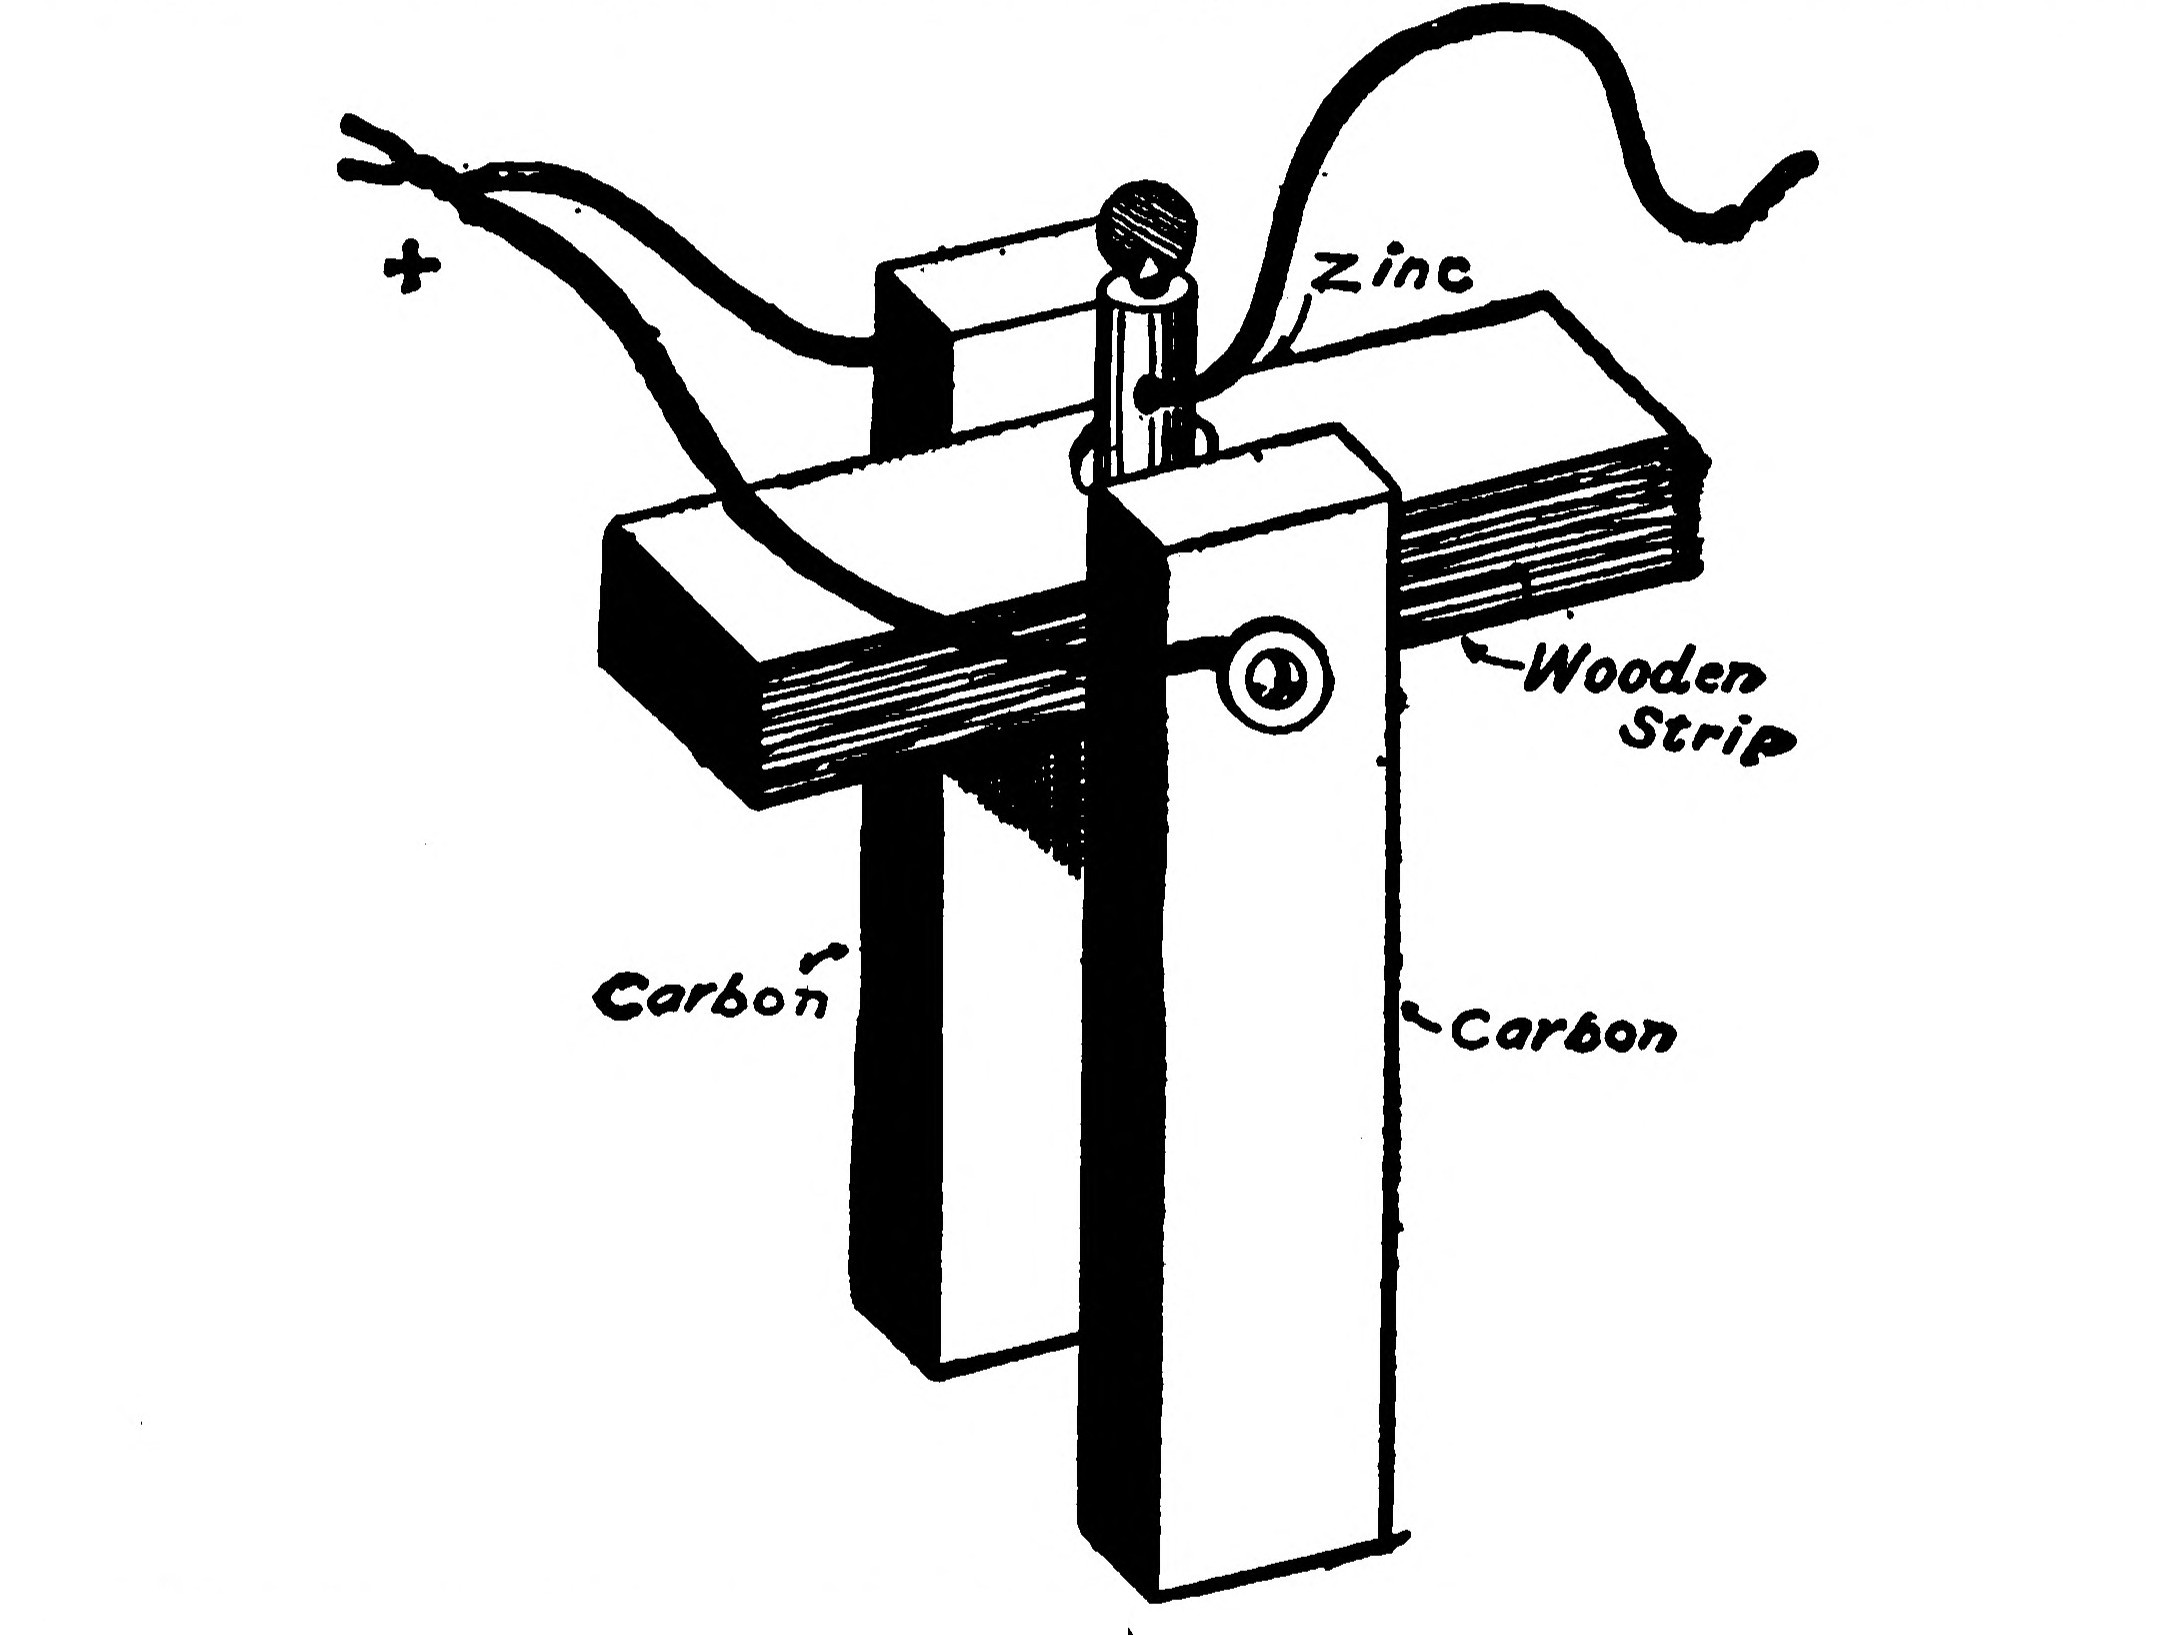 FIG. 29.—A Home-made Battery having two Carbon Plates with a Zinc Rod between.